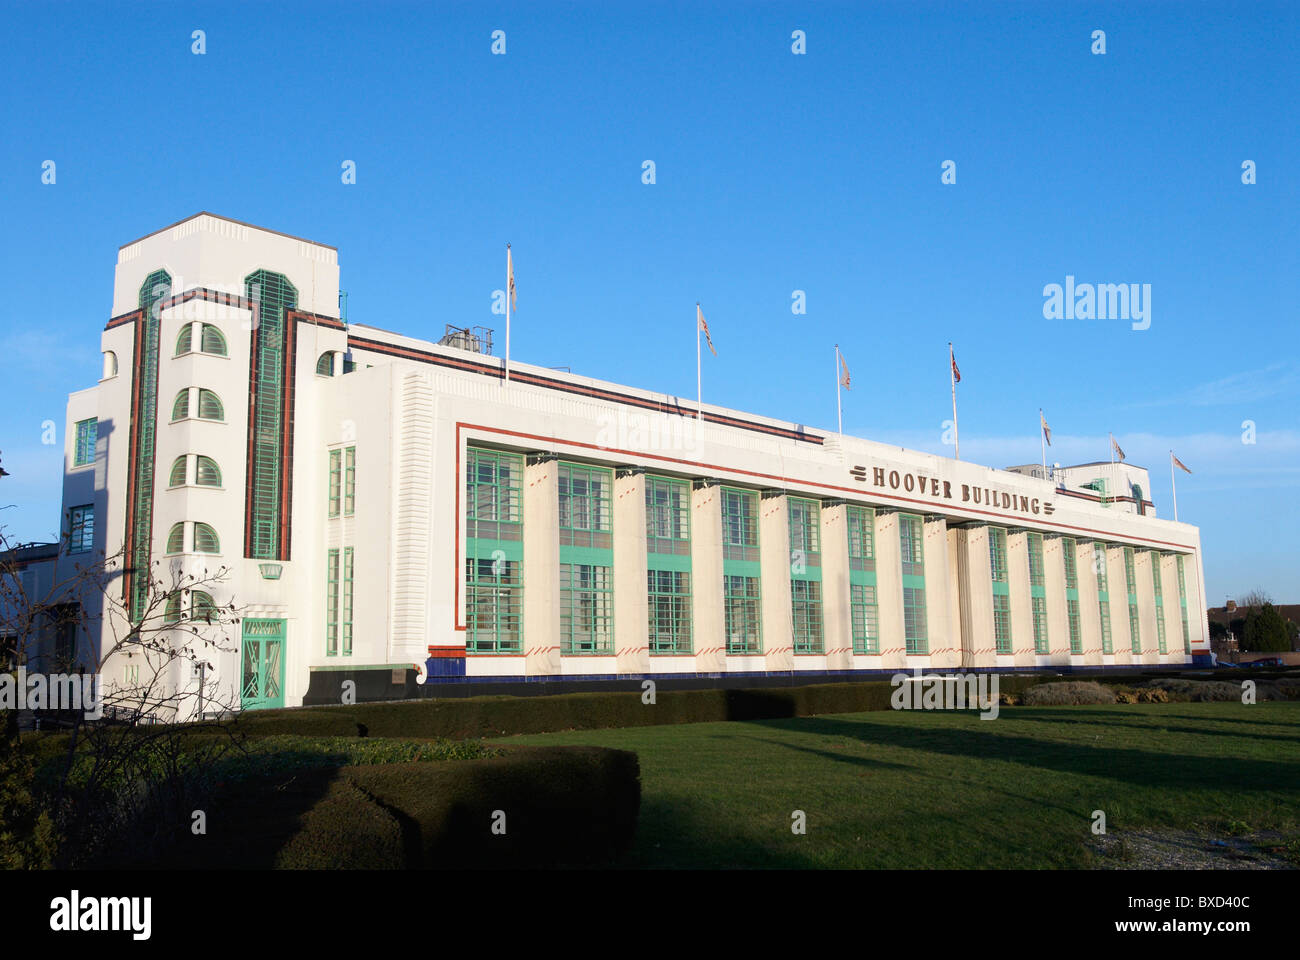 The grade II listed 'Hoover building'  designed and built for the Hoover company. Stock Photo